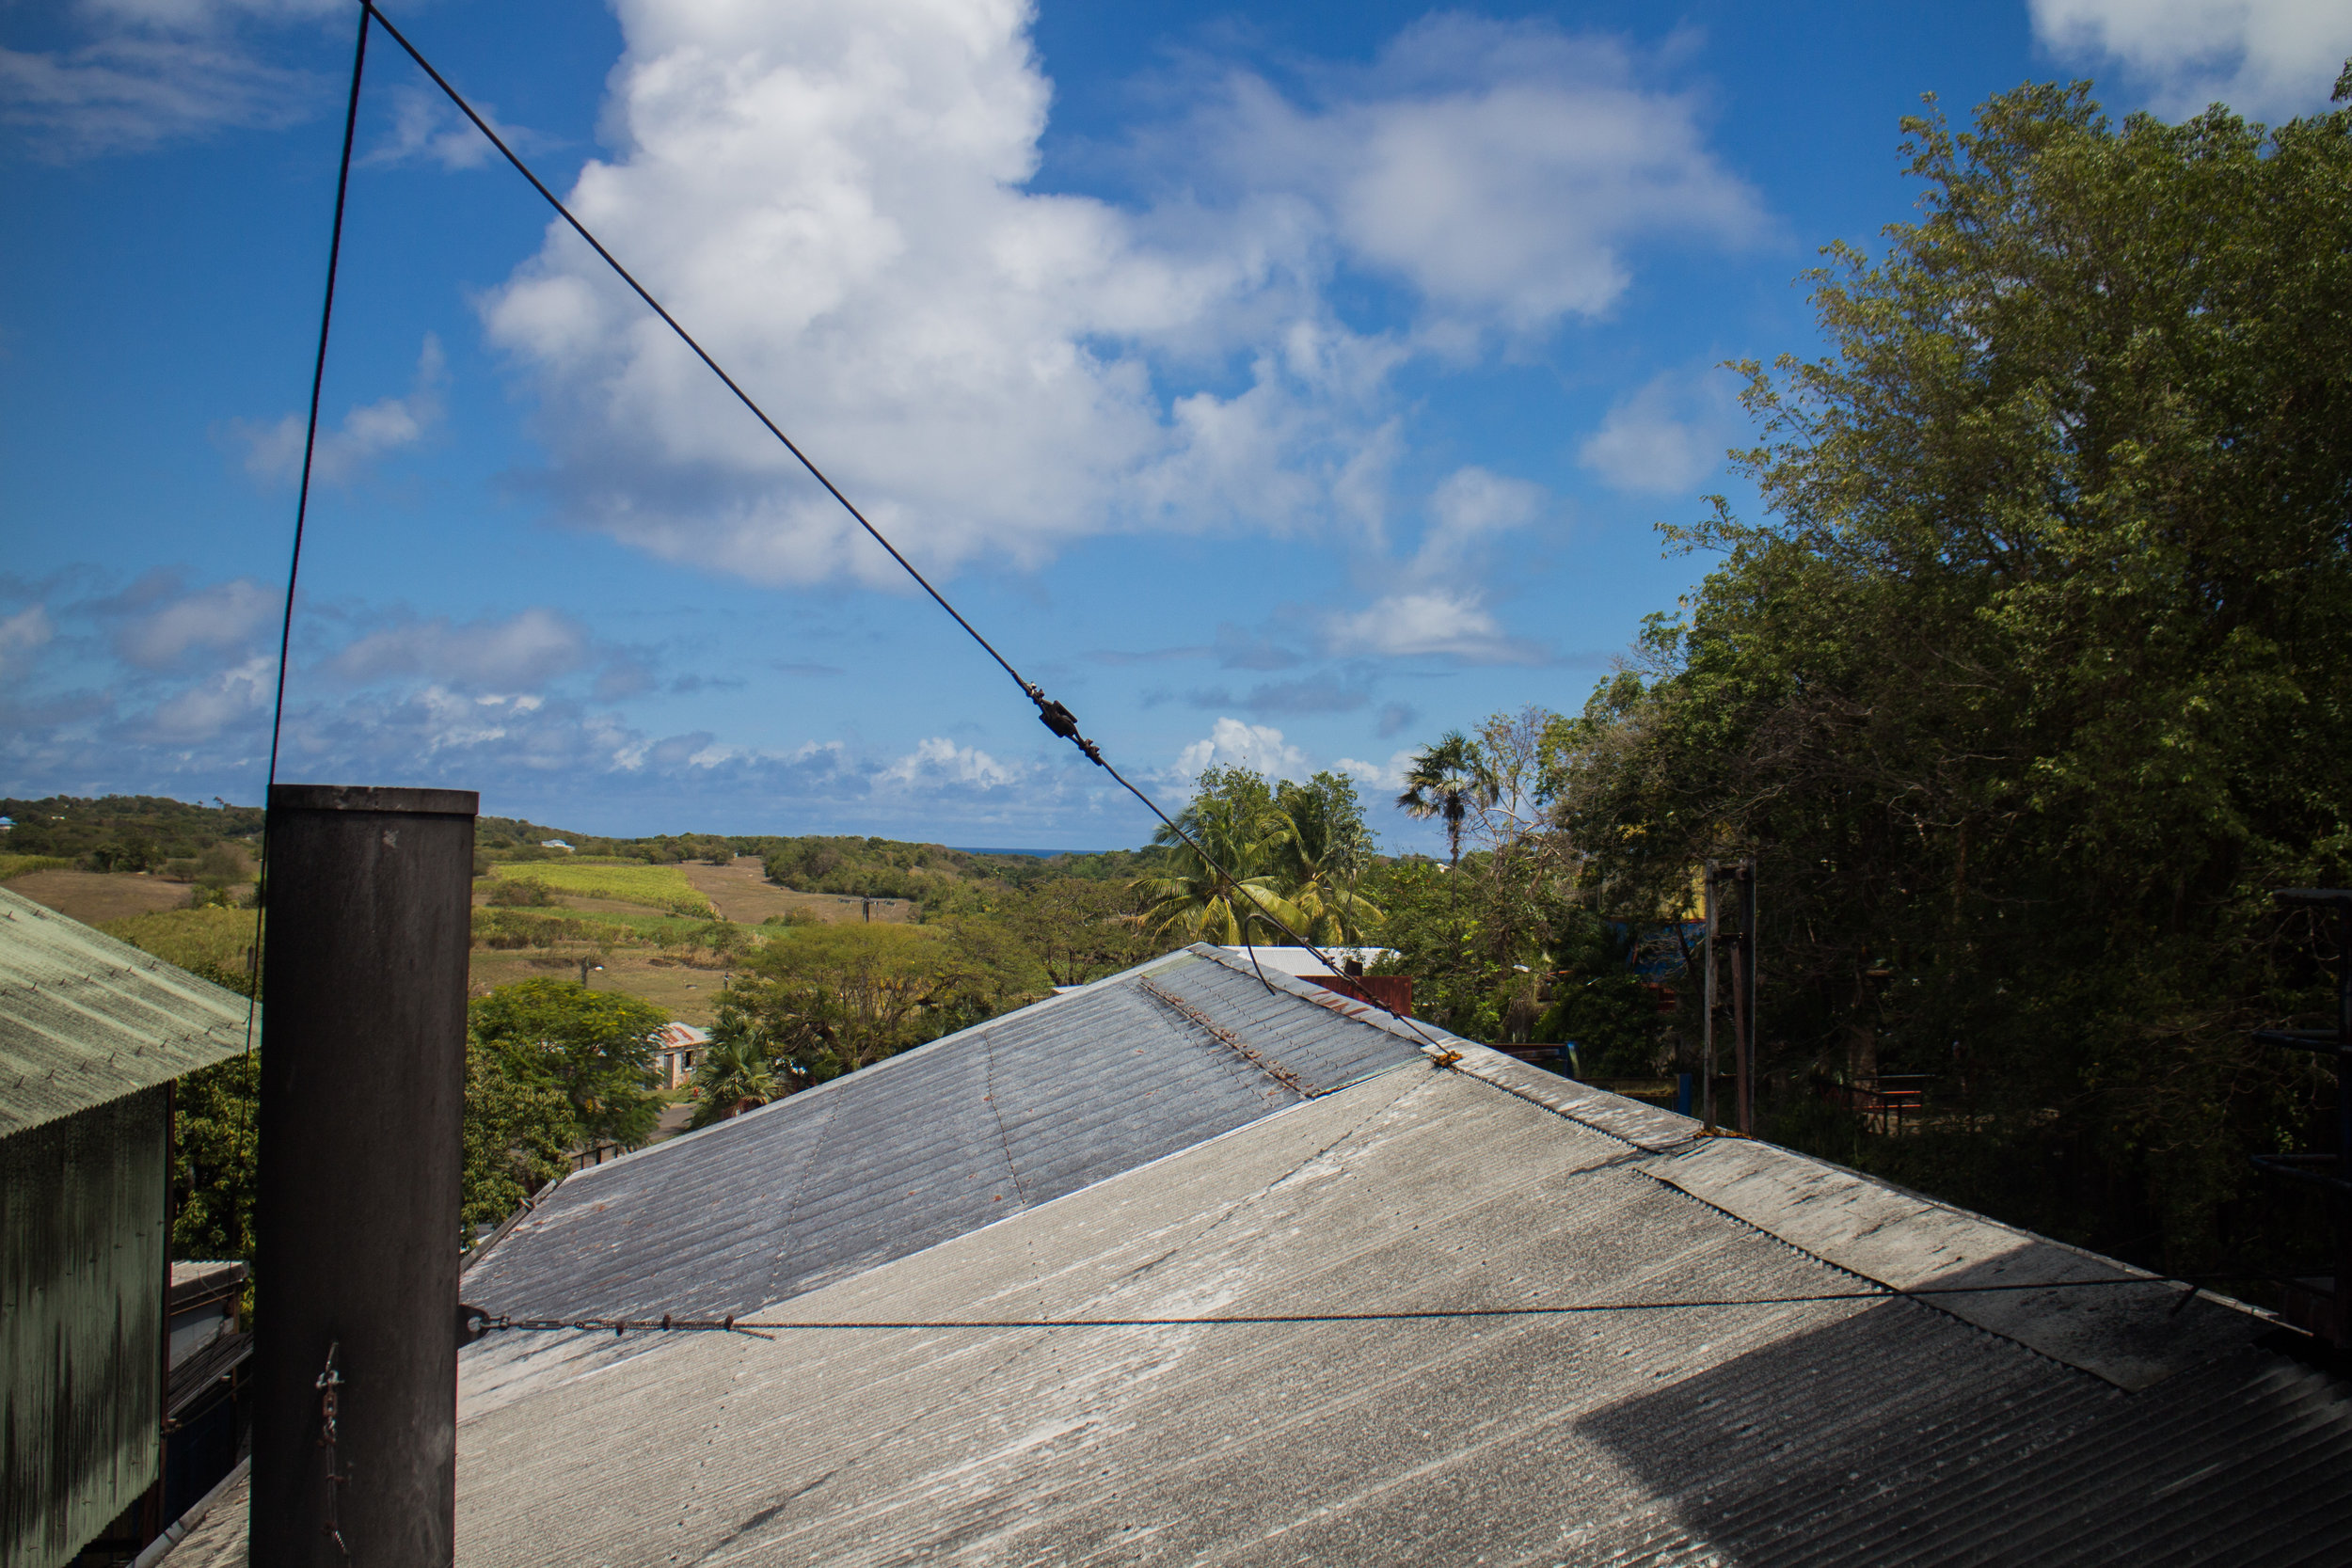 View from the roof above the furnace, Damoiseau.